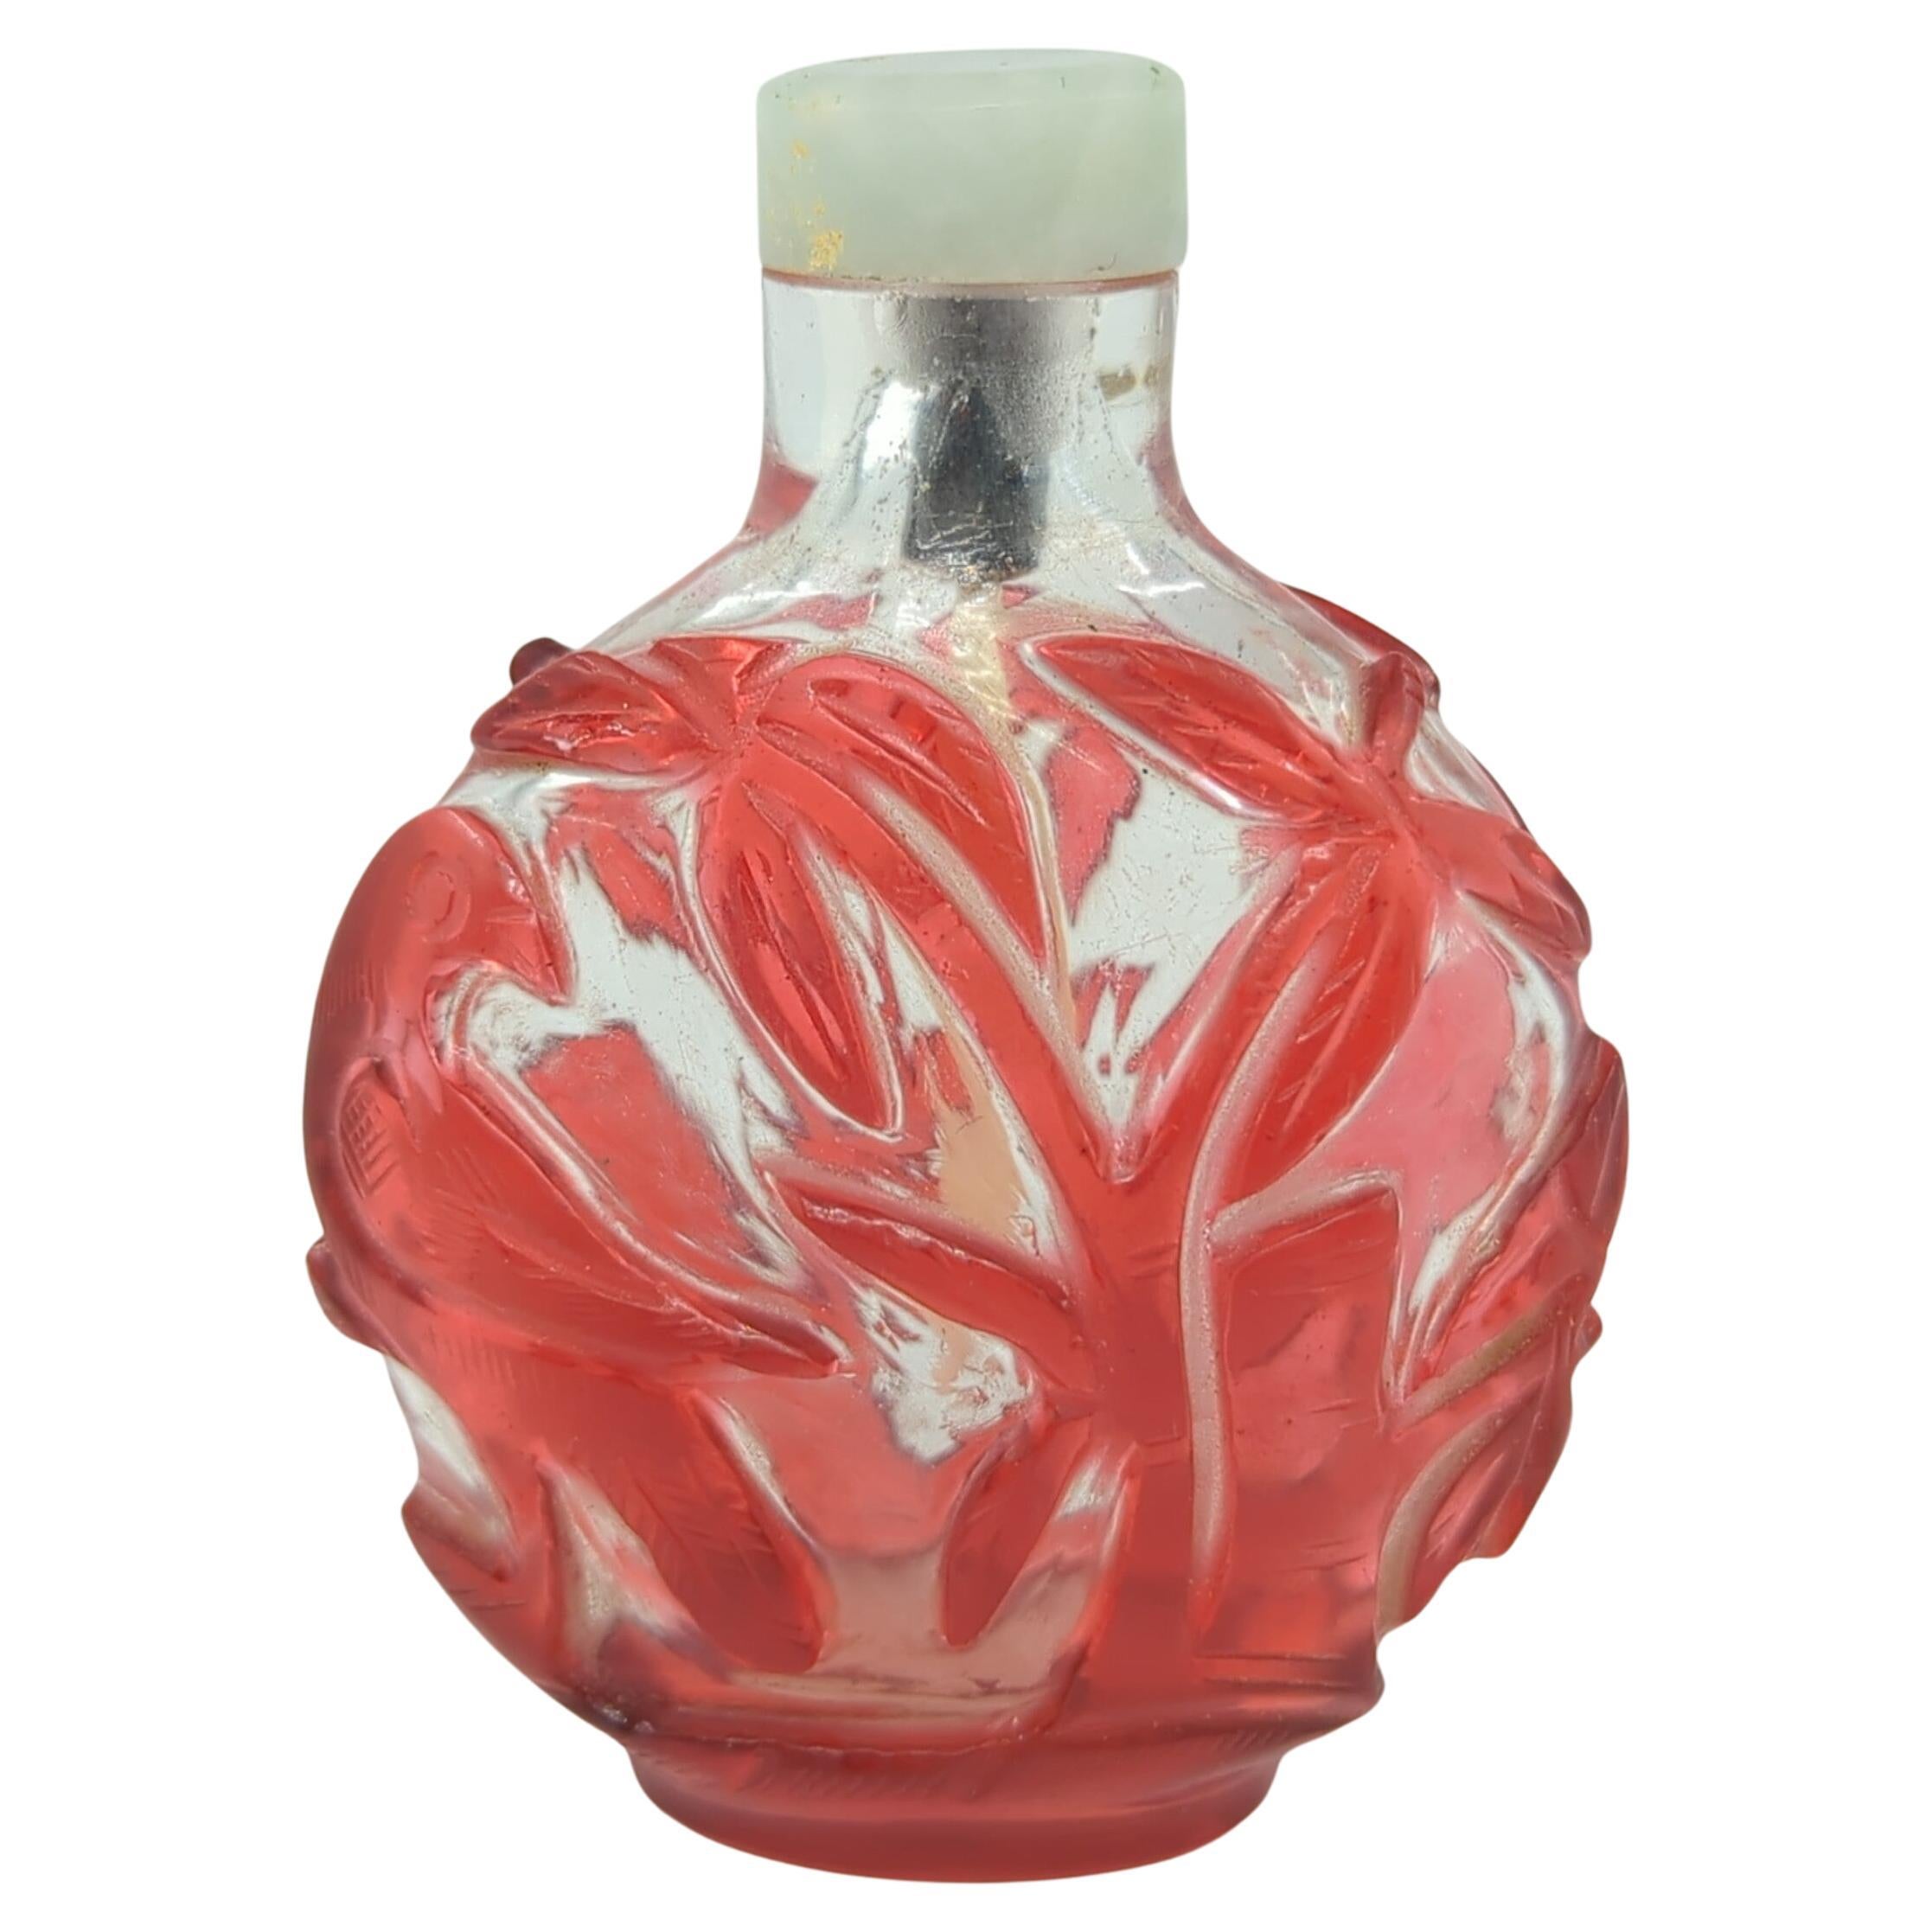 This late Qing to early Republic period snuff bottle is a fine example of ruby red glass overlay on clear glass ground, showcasing the esteemed glasswork techniques of the era. The bottle is in a compressed globular form, a shape that is both